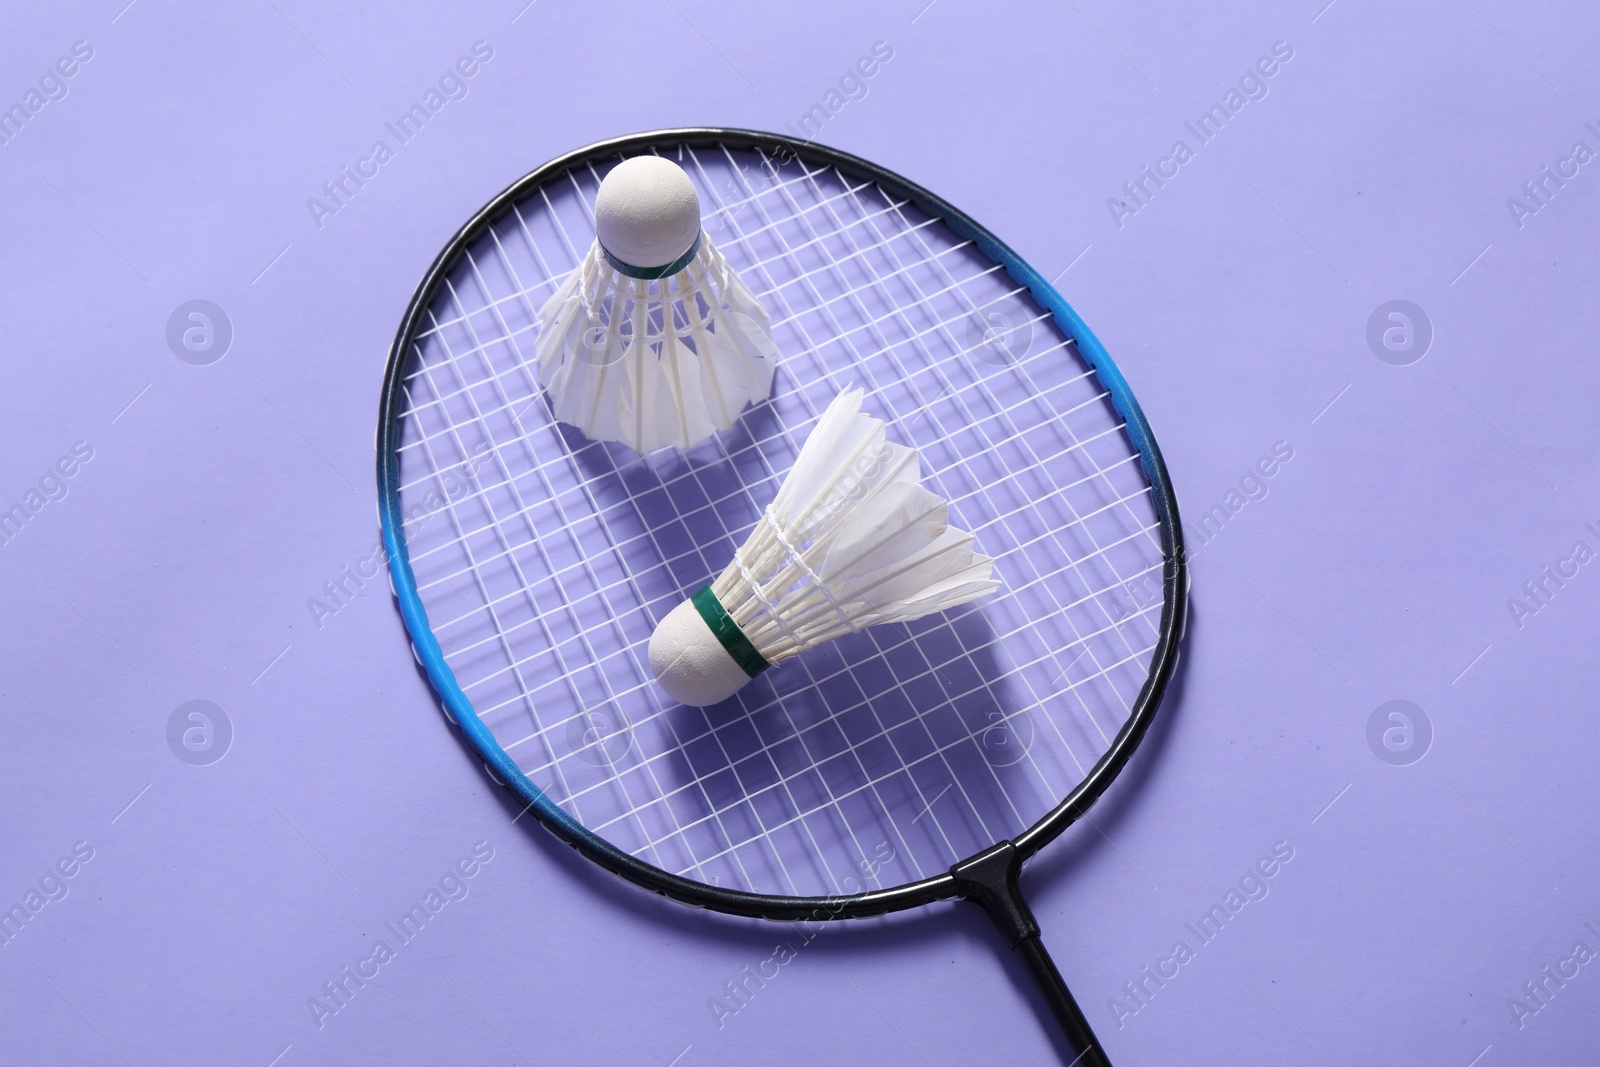 Photo of Feather badminton shuttlecocks and racket on violet background, top view